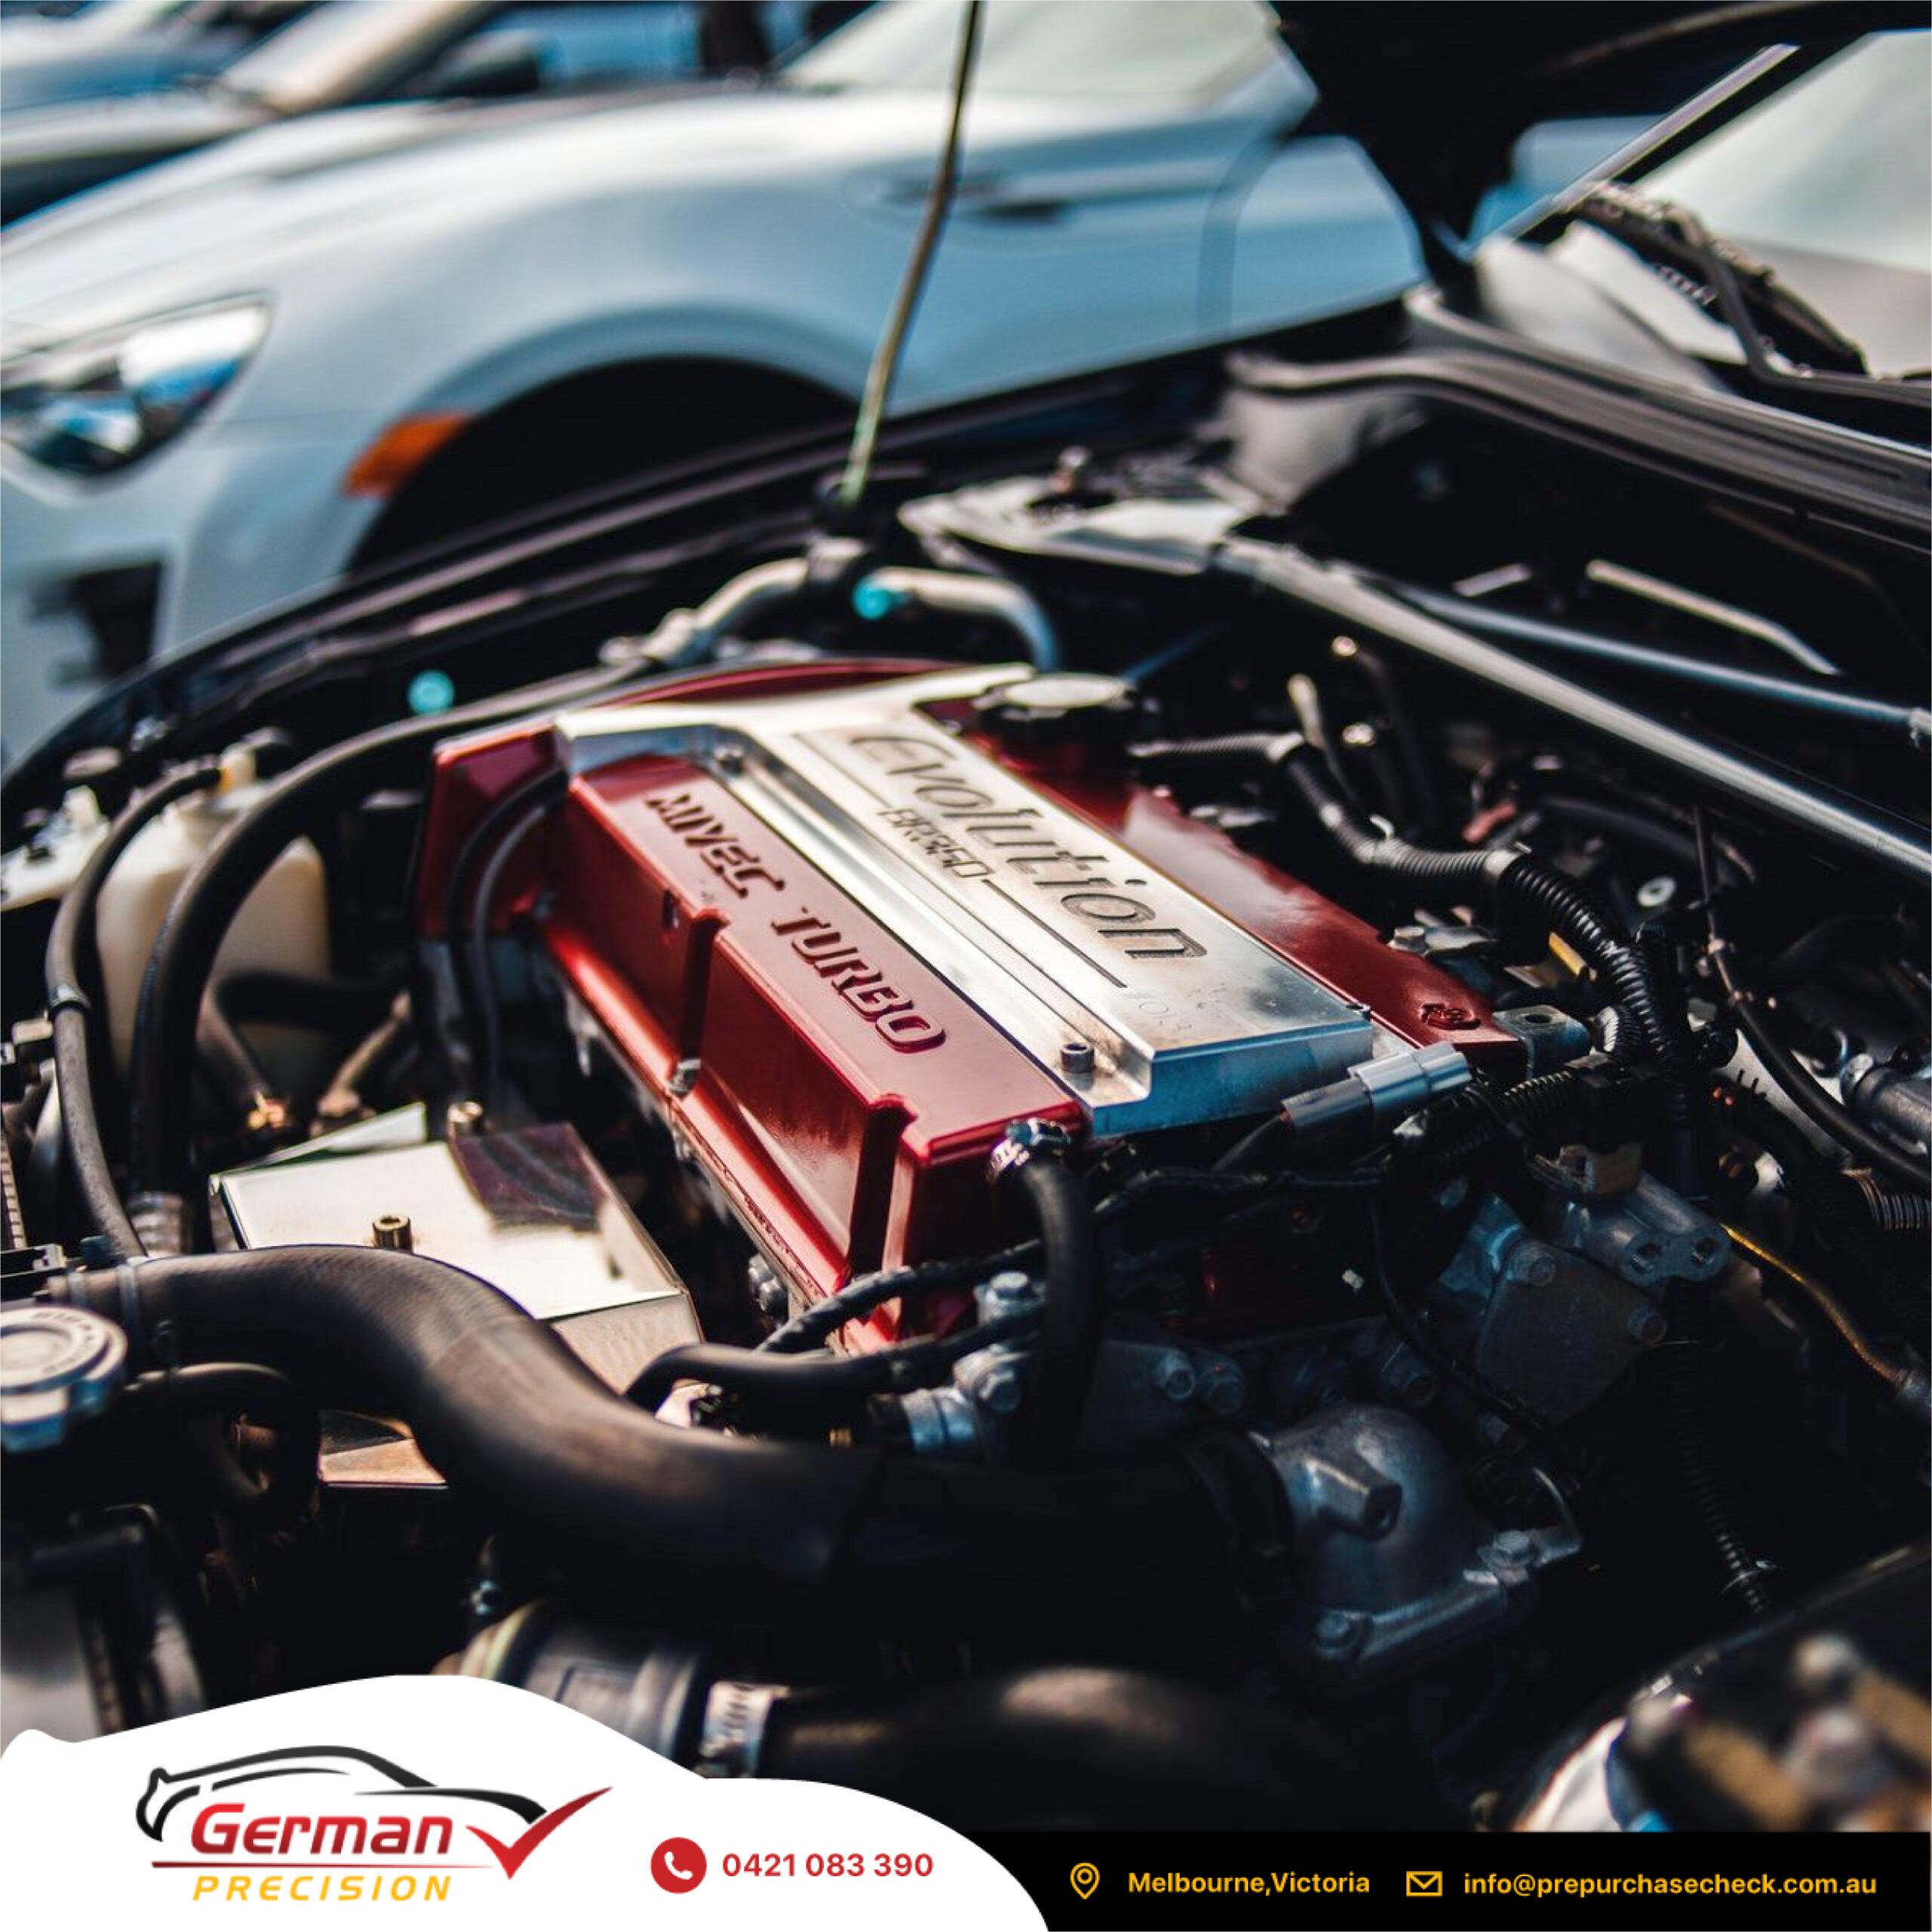 Maintain These Fluids to Keep Your Car Running Smoothly